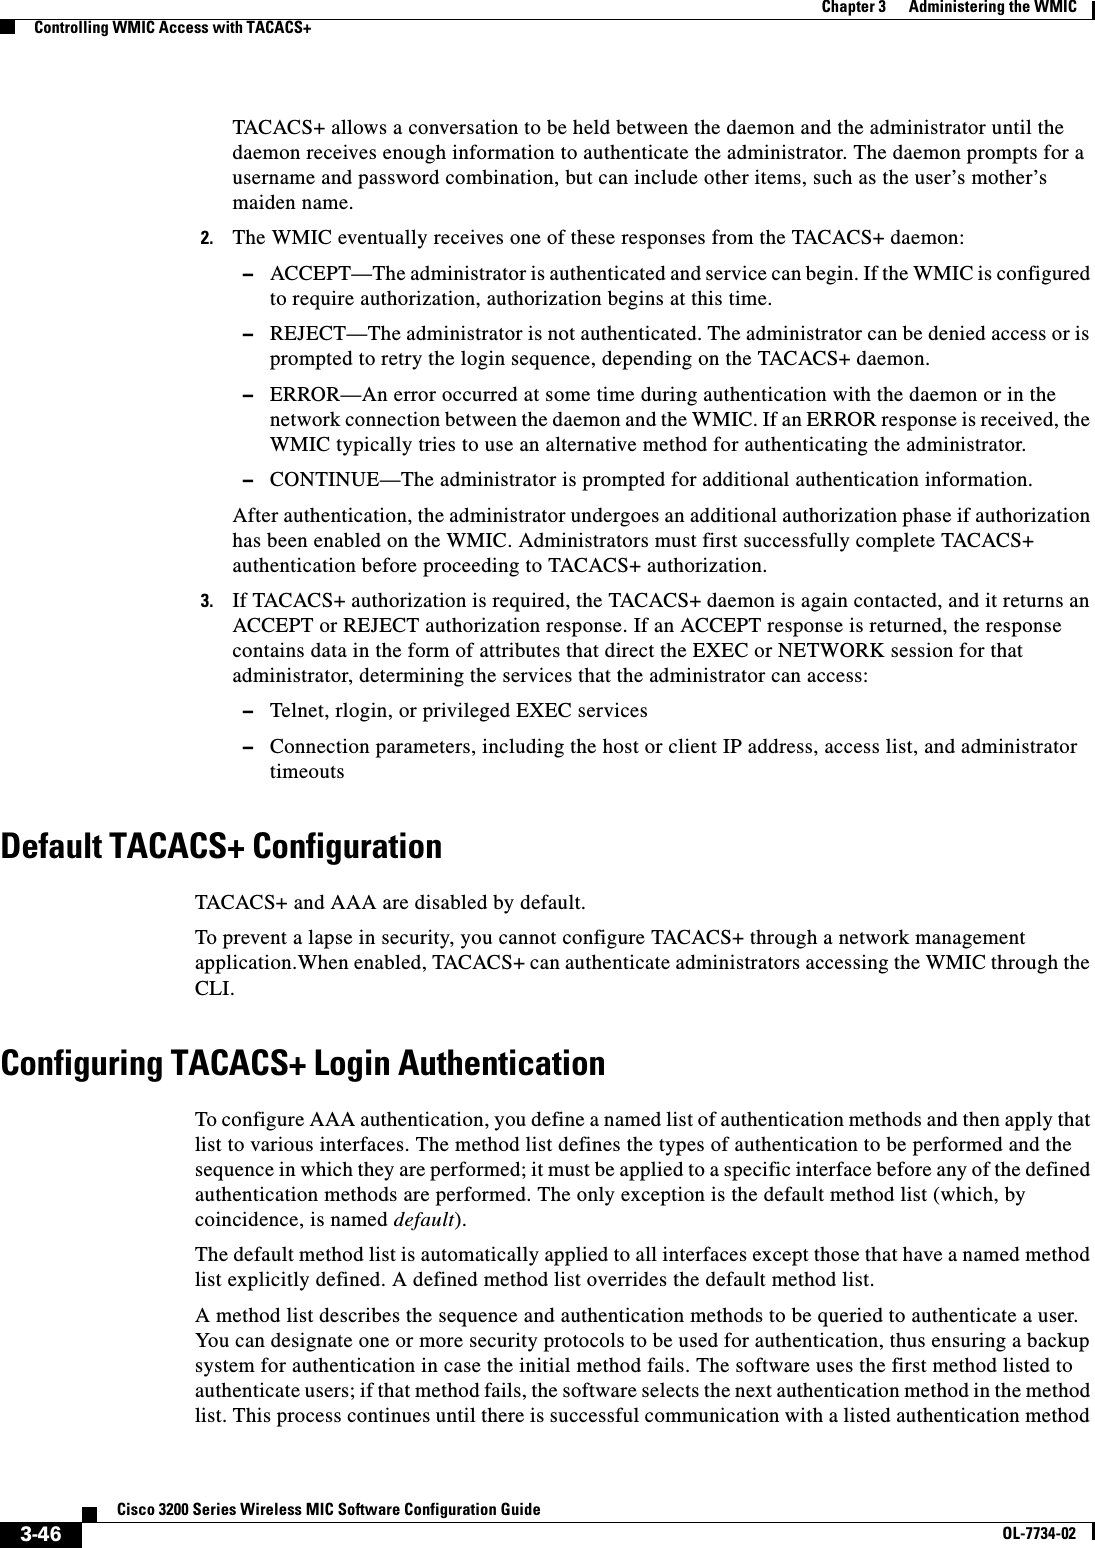 3-46Cisco 3200 Series Wireless MIC Software Configuration GuideOL-7734-02Chapter 3      Administering the WMICControlling WMIC Access with TACACS+TACACS+ allows a conversation to be held between the daemon and the administrator until the daemon receives enough information to authenticate the administrator. The daemon prompts for a username and password combination, but can include other items, such as the user’s mother’s maiden name. 2. The WMIC eventually receives one of these responses from the TACACS+ daemon: –ACCEPT—The administrator is authenticated and service can begin. If the WMIC is configured to require authorization, authorization begins at this time.–REJECT—The administrator is not authenticated. The administrator can be denied access or is prompted to retry the login sequence, depending on the TACACS+ daemon.–ERROR—An error occurred at some time during authentication with the daemon or in the network connection between the daemon and the WMIC. If an ERROR response is received, the WMIC typically tries to use an alternative method for authenticating the administrator.–CONTINUE—The administrator is prompted for additional authentication information.After authentication, the administrator undergoes an additional authorization phase if authorization has been enabled on the WMIC. Administrators must first successfully complete TACACS+ authentication before proceeding to TACACS+ authorization. 3. If TACACS+ authorization is required, the TACACS+ daemon is again contacted, and it returns an ACCEPT or REJECT authorization response. If an ACCEPT response is returned, the response contains data in the form of attributes that direct the EXEC or NETWORK session for that administrator, determining the services that the administrator can access:–Telnet, rlogin, or privileged EXEC services–Connection parameters, including the host or client IP address, access list, and administrator timeoutsDefault TACACS+ ConfigurationTACACS+ and AAA are disabled by default.To prevent a lapse in security, you cannot configure TACACS+ through a network management application.When enabled, TACACS+ can authenticate administrators accessing the WMIC through the CLI.Configuring TACACS+ Login AuthenticationTo configure AAA authentication, you define a named list of authentication methods and then apply that list to various interfaces. The method list defines the types of authentication to be performed and the sequence in which they are performed; it must be applied to a specific interface before any of the defined authentication methods are performed. The only exception is the default method list (which, by coincidence, is named default).The default method list is automatically applied to all interfaces except those that have a named method list explicitly defined. A defined method list overrides the default method list.A method list describes the sequence and authentication methods to be queried to authenticate a user. You can designate one or more security protocols to be used for authentication, thus ensuring a backup system for authentication in case the initial method fails. The software uses the first method listed to authenticate users; if that method fails, the software selects the next authentication method in the method list. This process continues until there is successful communication with a listed authentication method 